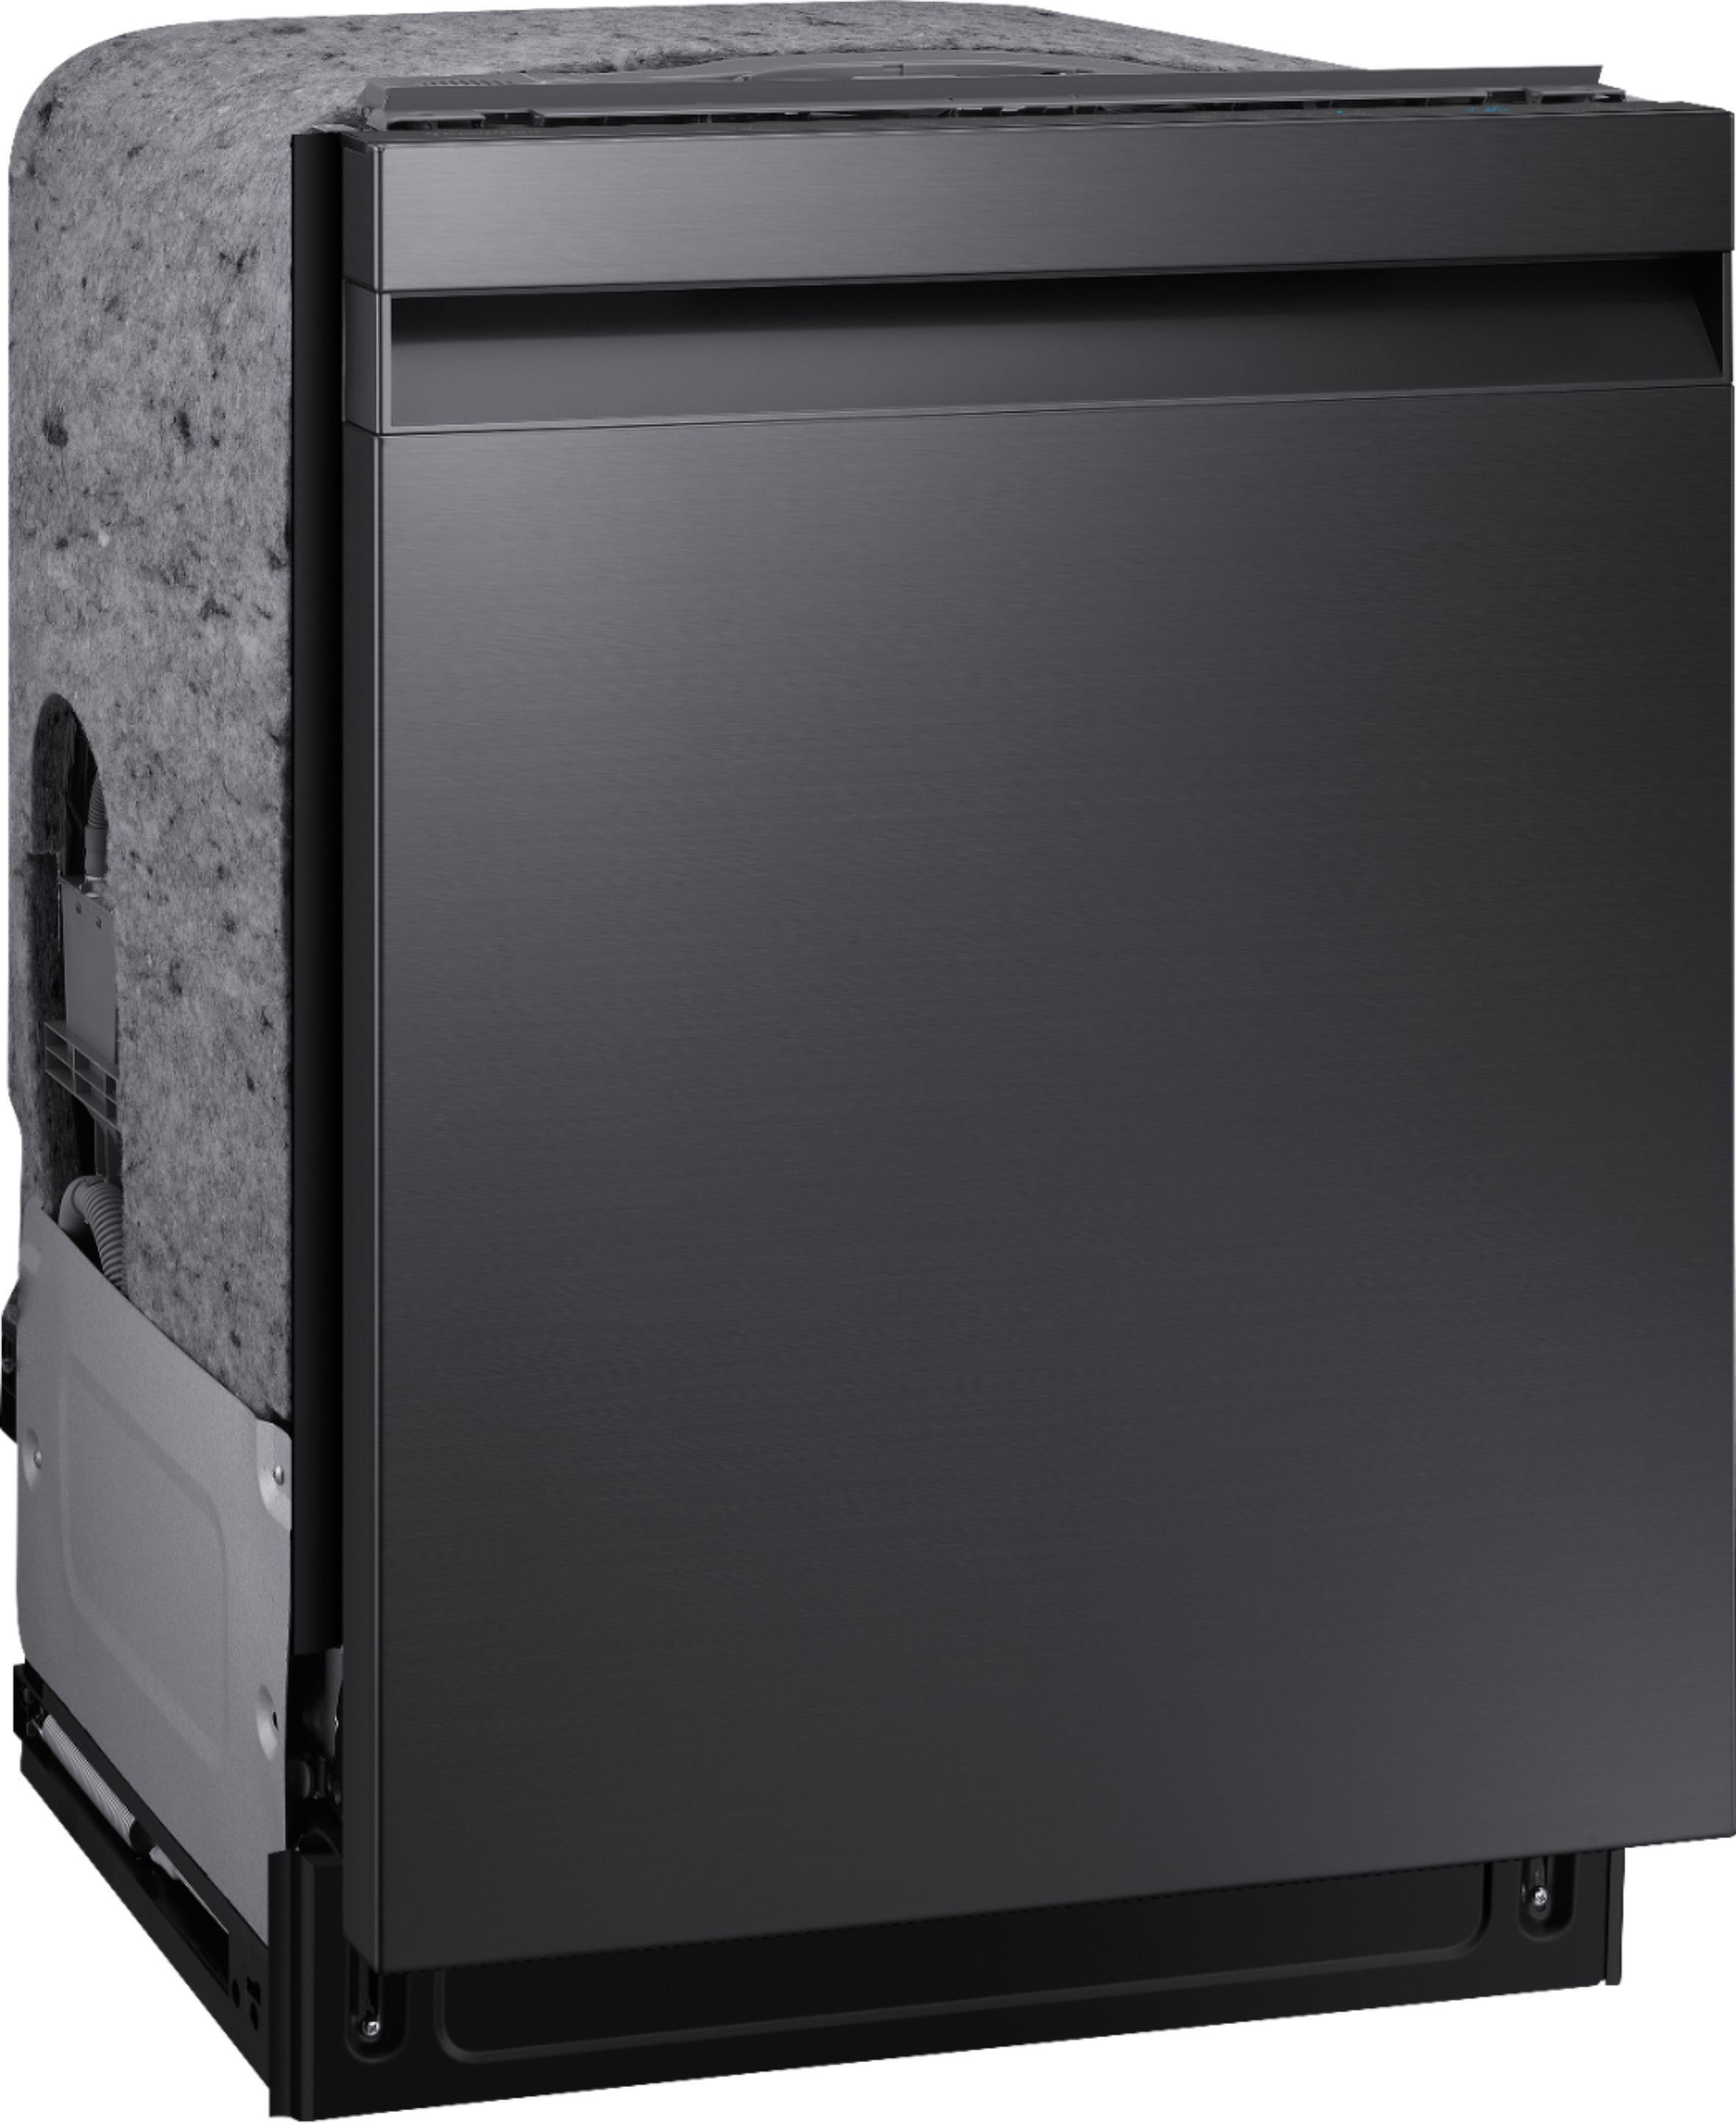 Angle View: Samsung - StormWash 24" Top Control Built-In Dishwasher with AutoRelease Dry, 3rd Rack, 42 dBA - Black stainless steel